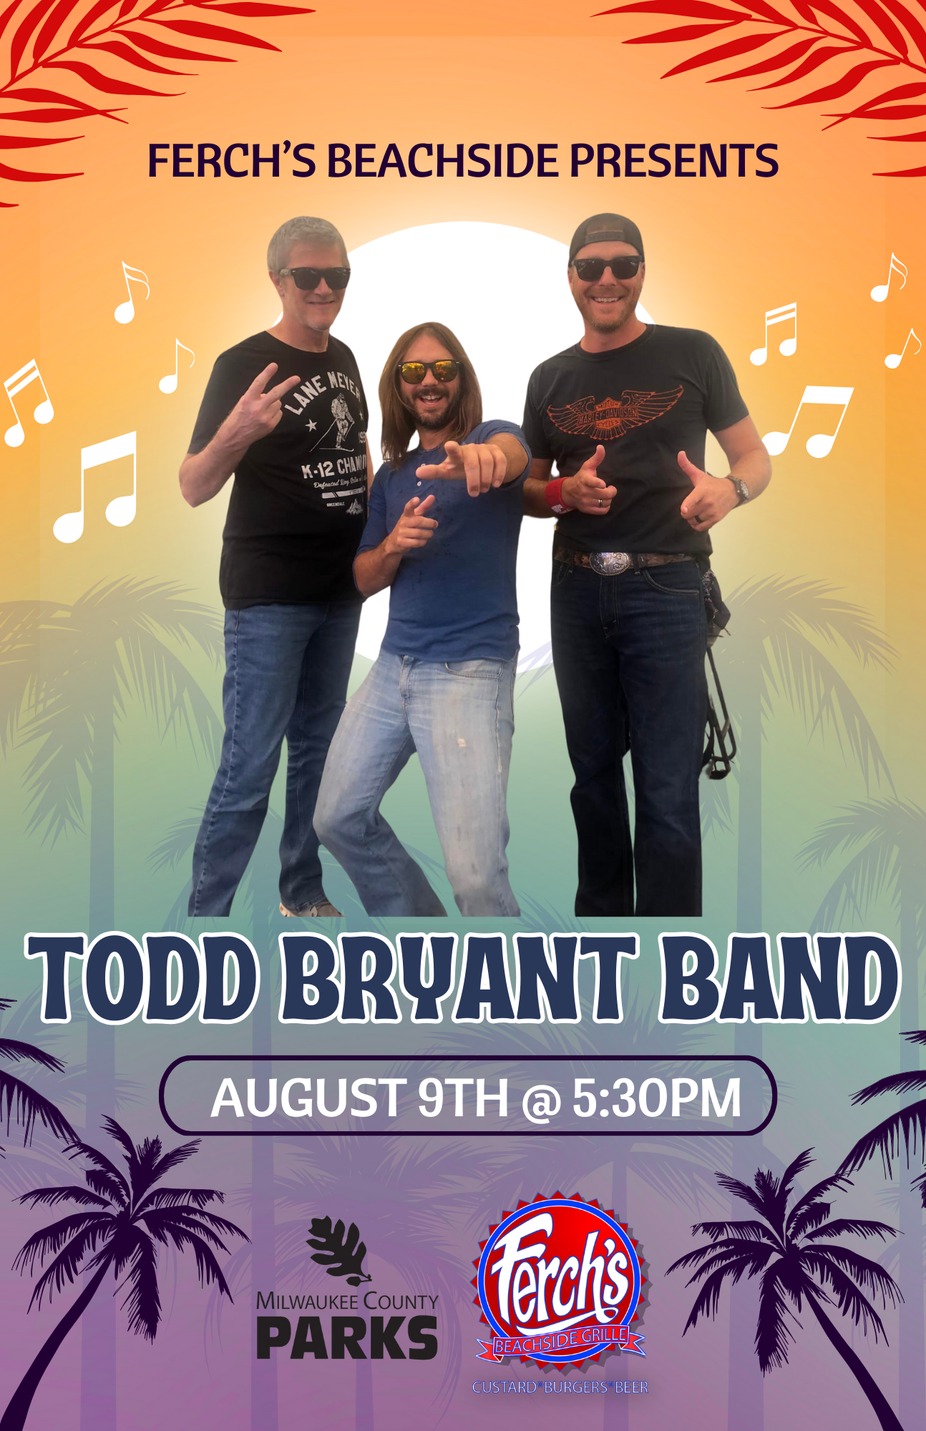 Live Music - Todd Bryant Band event photo